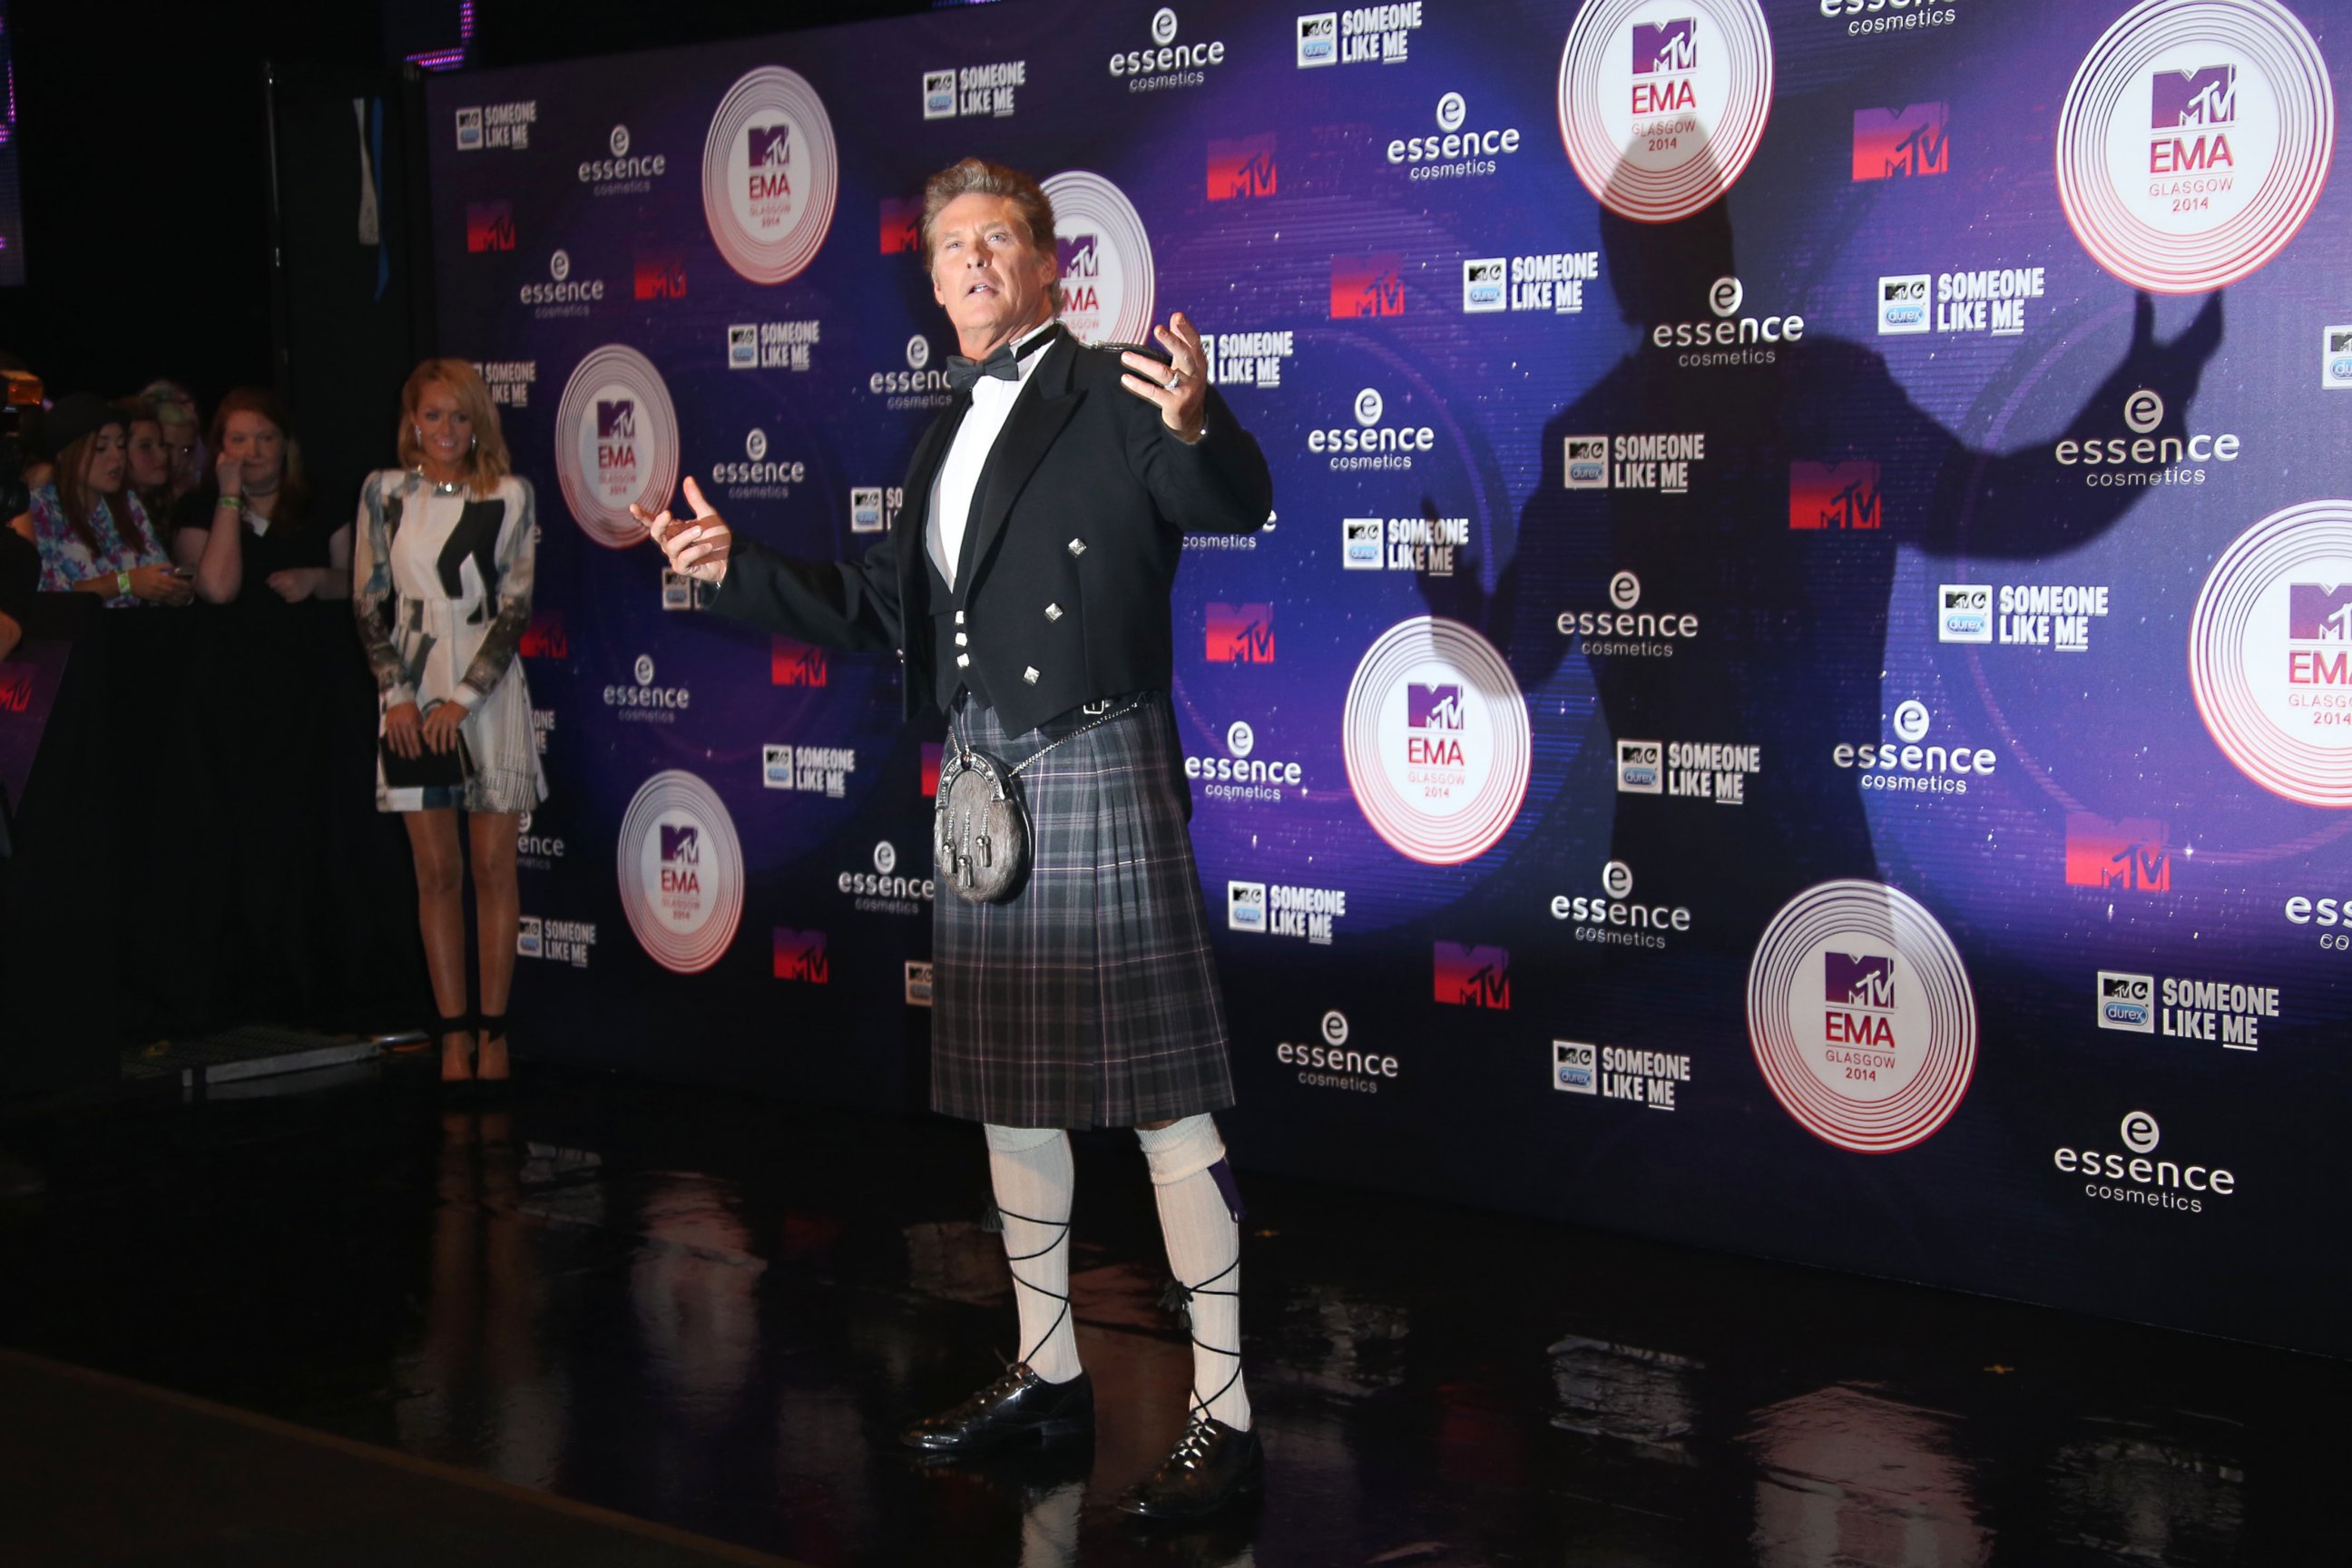 Actor David Hasselhoff poses for photographers upon arrival at the 2014 MTV European Music Awards in Glasgow, Nov. 9, 2014.